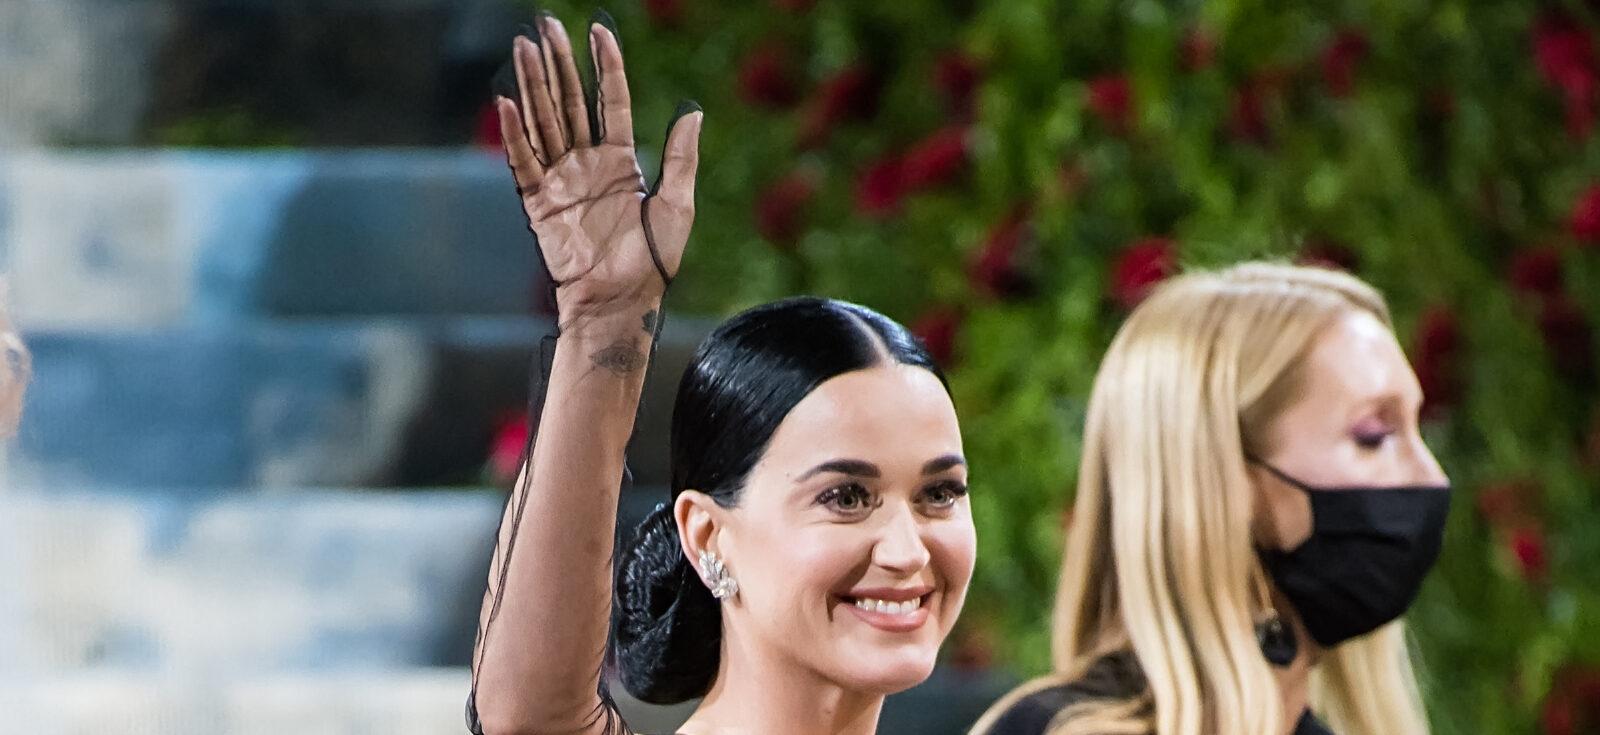 How Katy Perry’s Family Plans Allegedly Influenced Exit From $30M ‘American Idol’ Gig